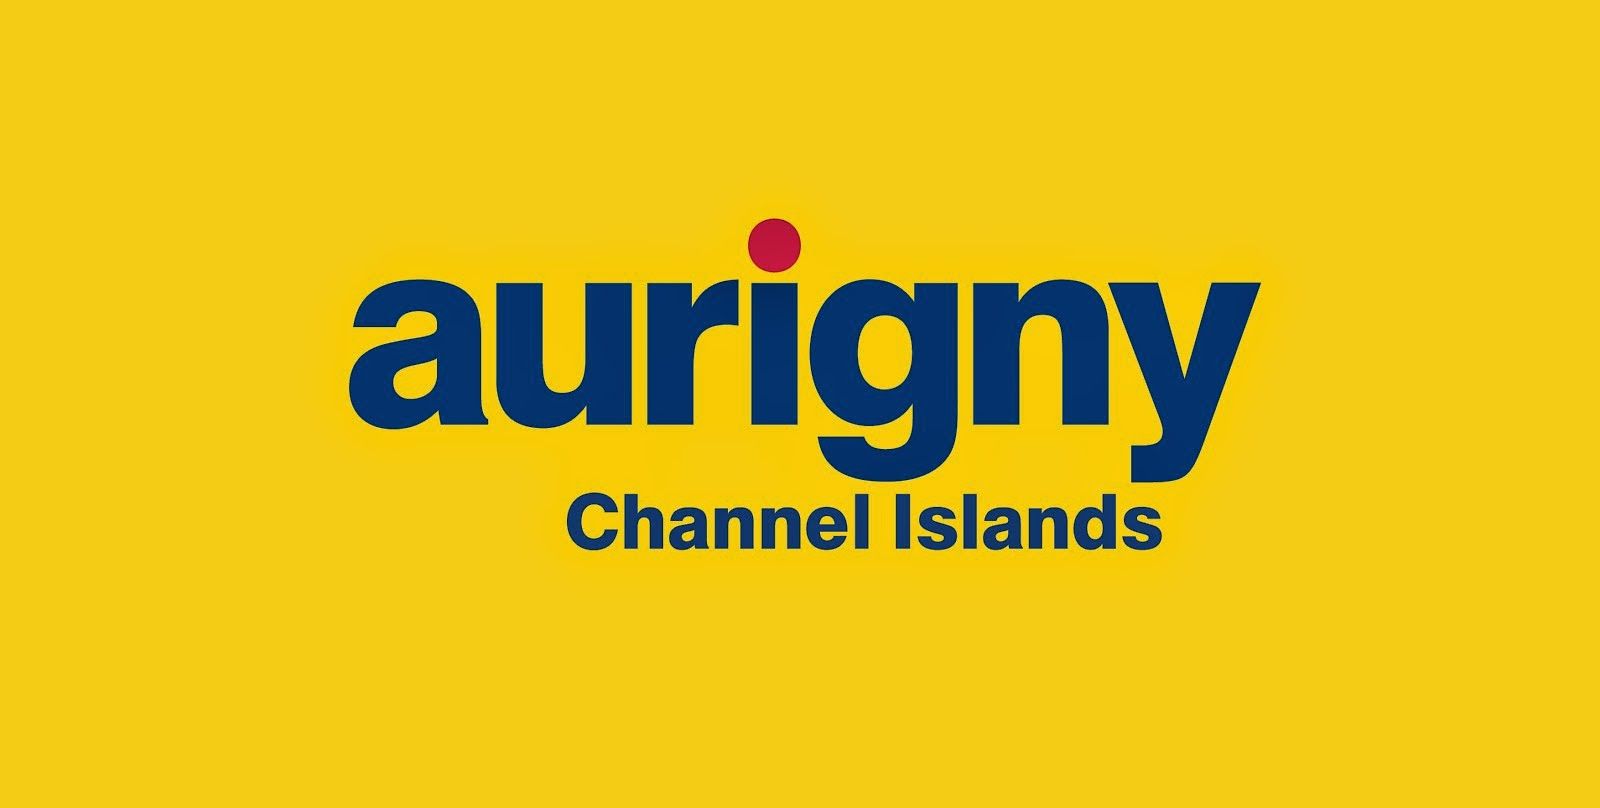 Manchester airport terminal 1 - Aurigny Airlines Logo